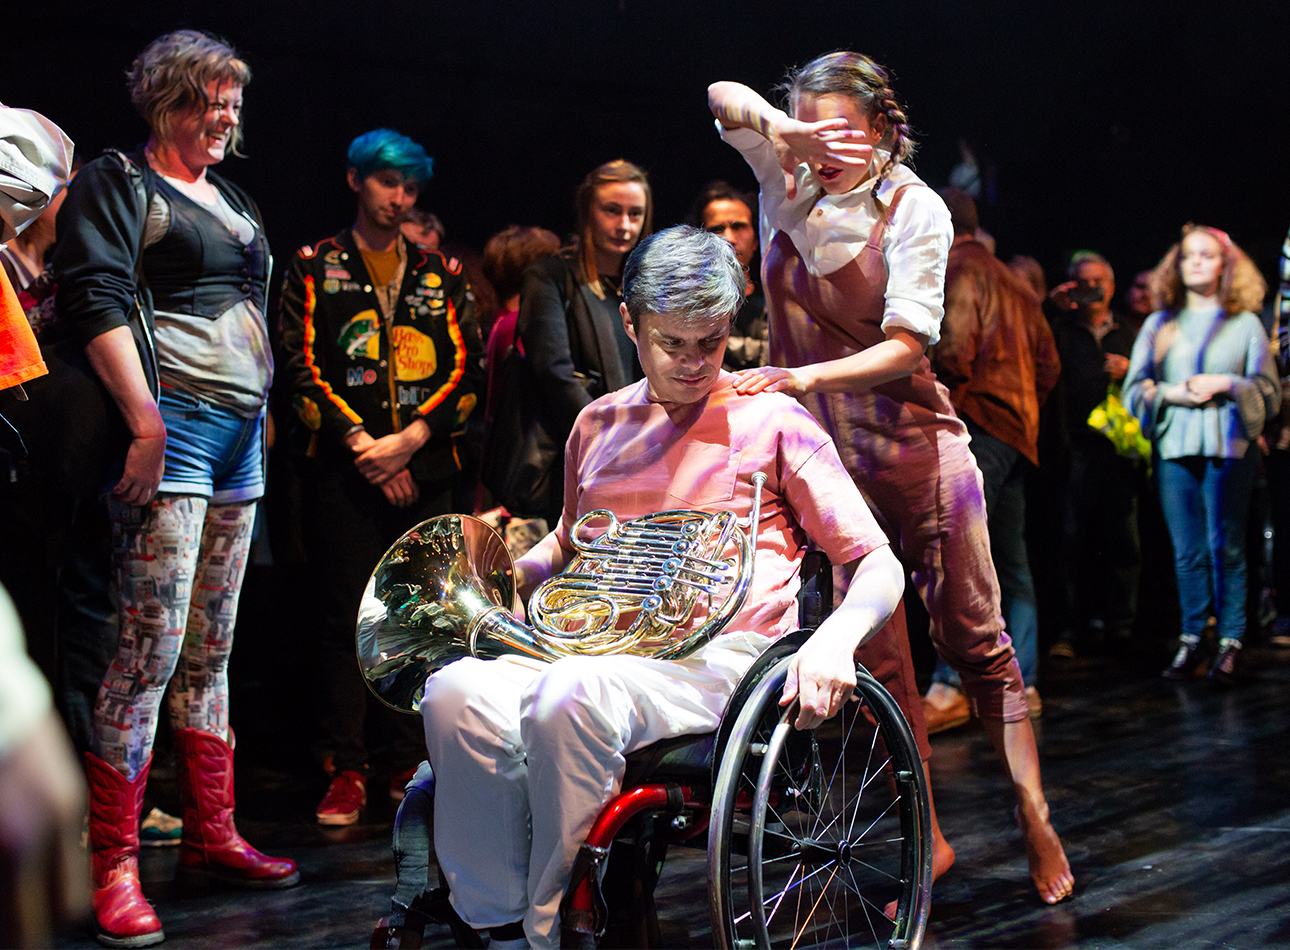 A man in a wheelchair holds a French Horn in a circle of diverse people in casual dress.